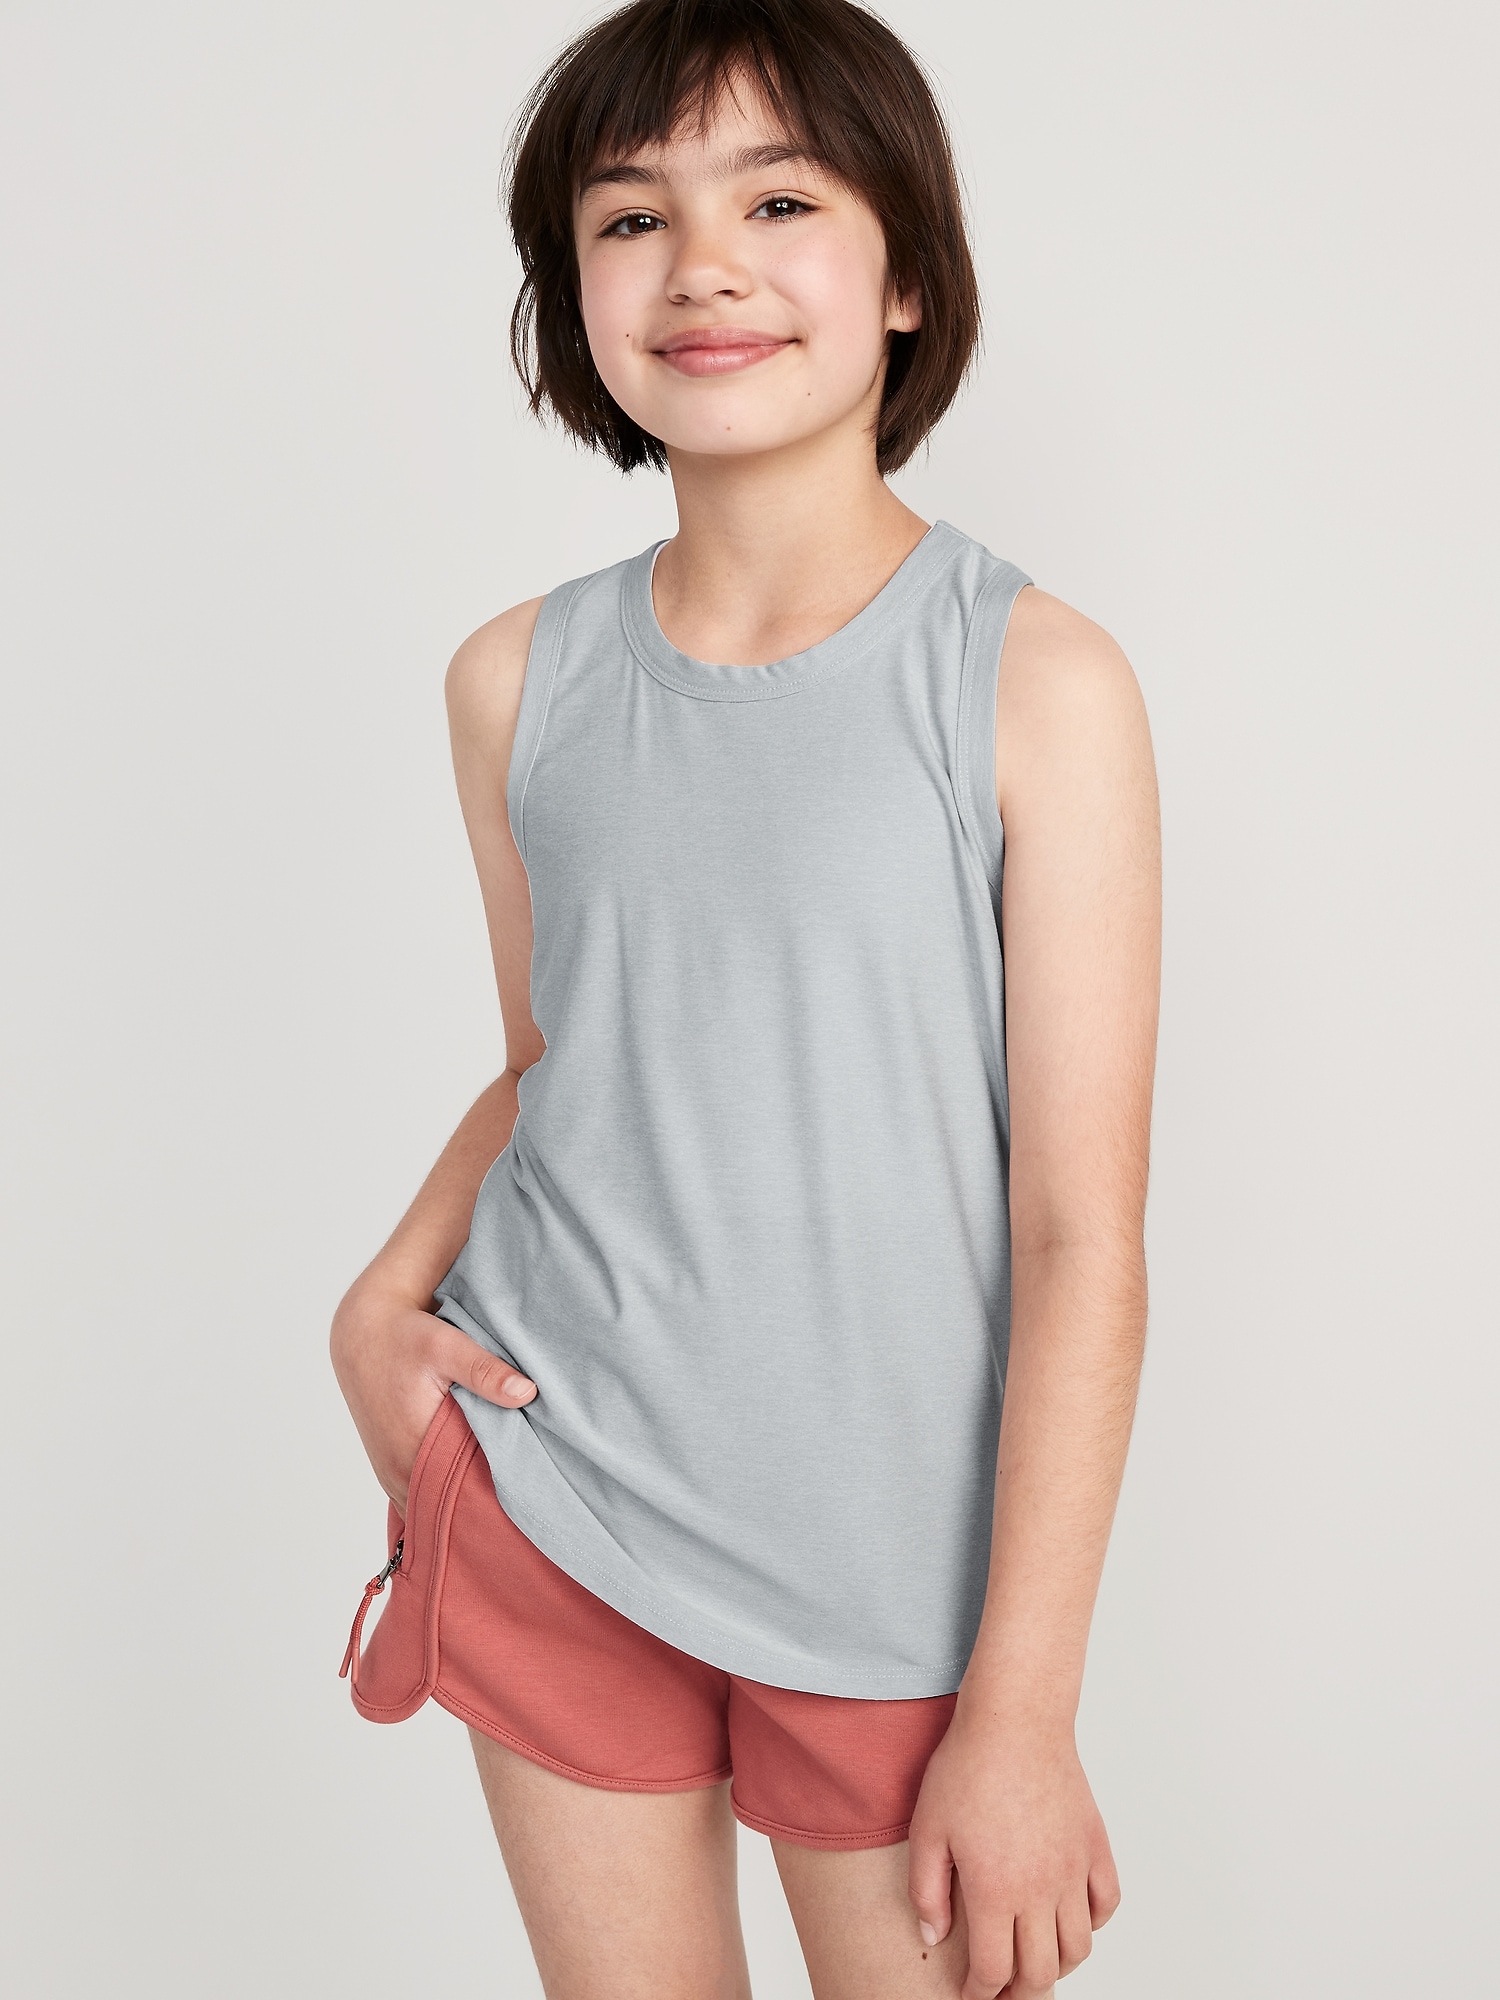 Old Navy Cloud 94 Soft Go-Dry Cool Tunic Tank Top for Girls gray. 1